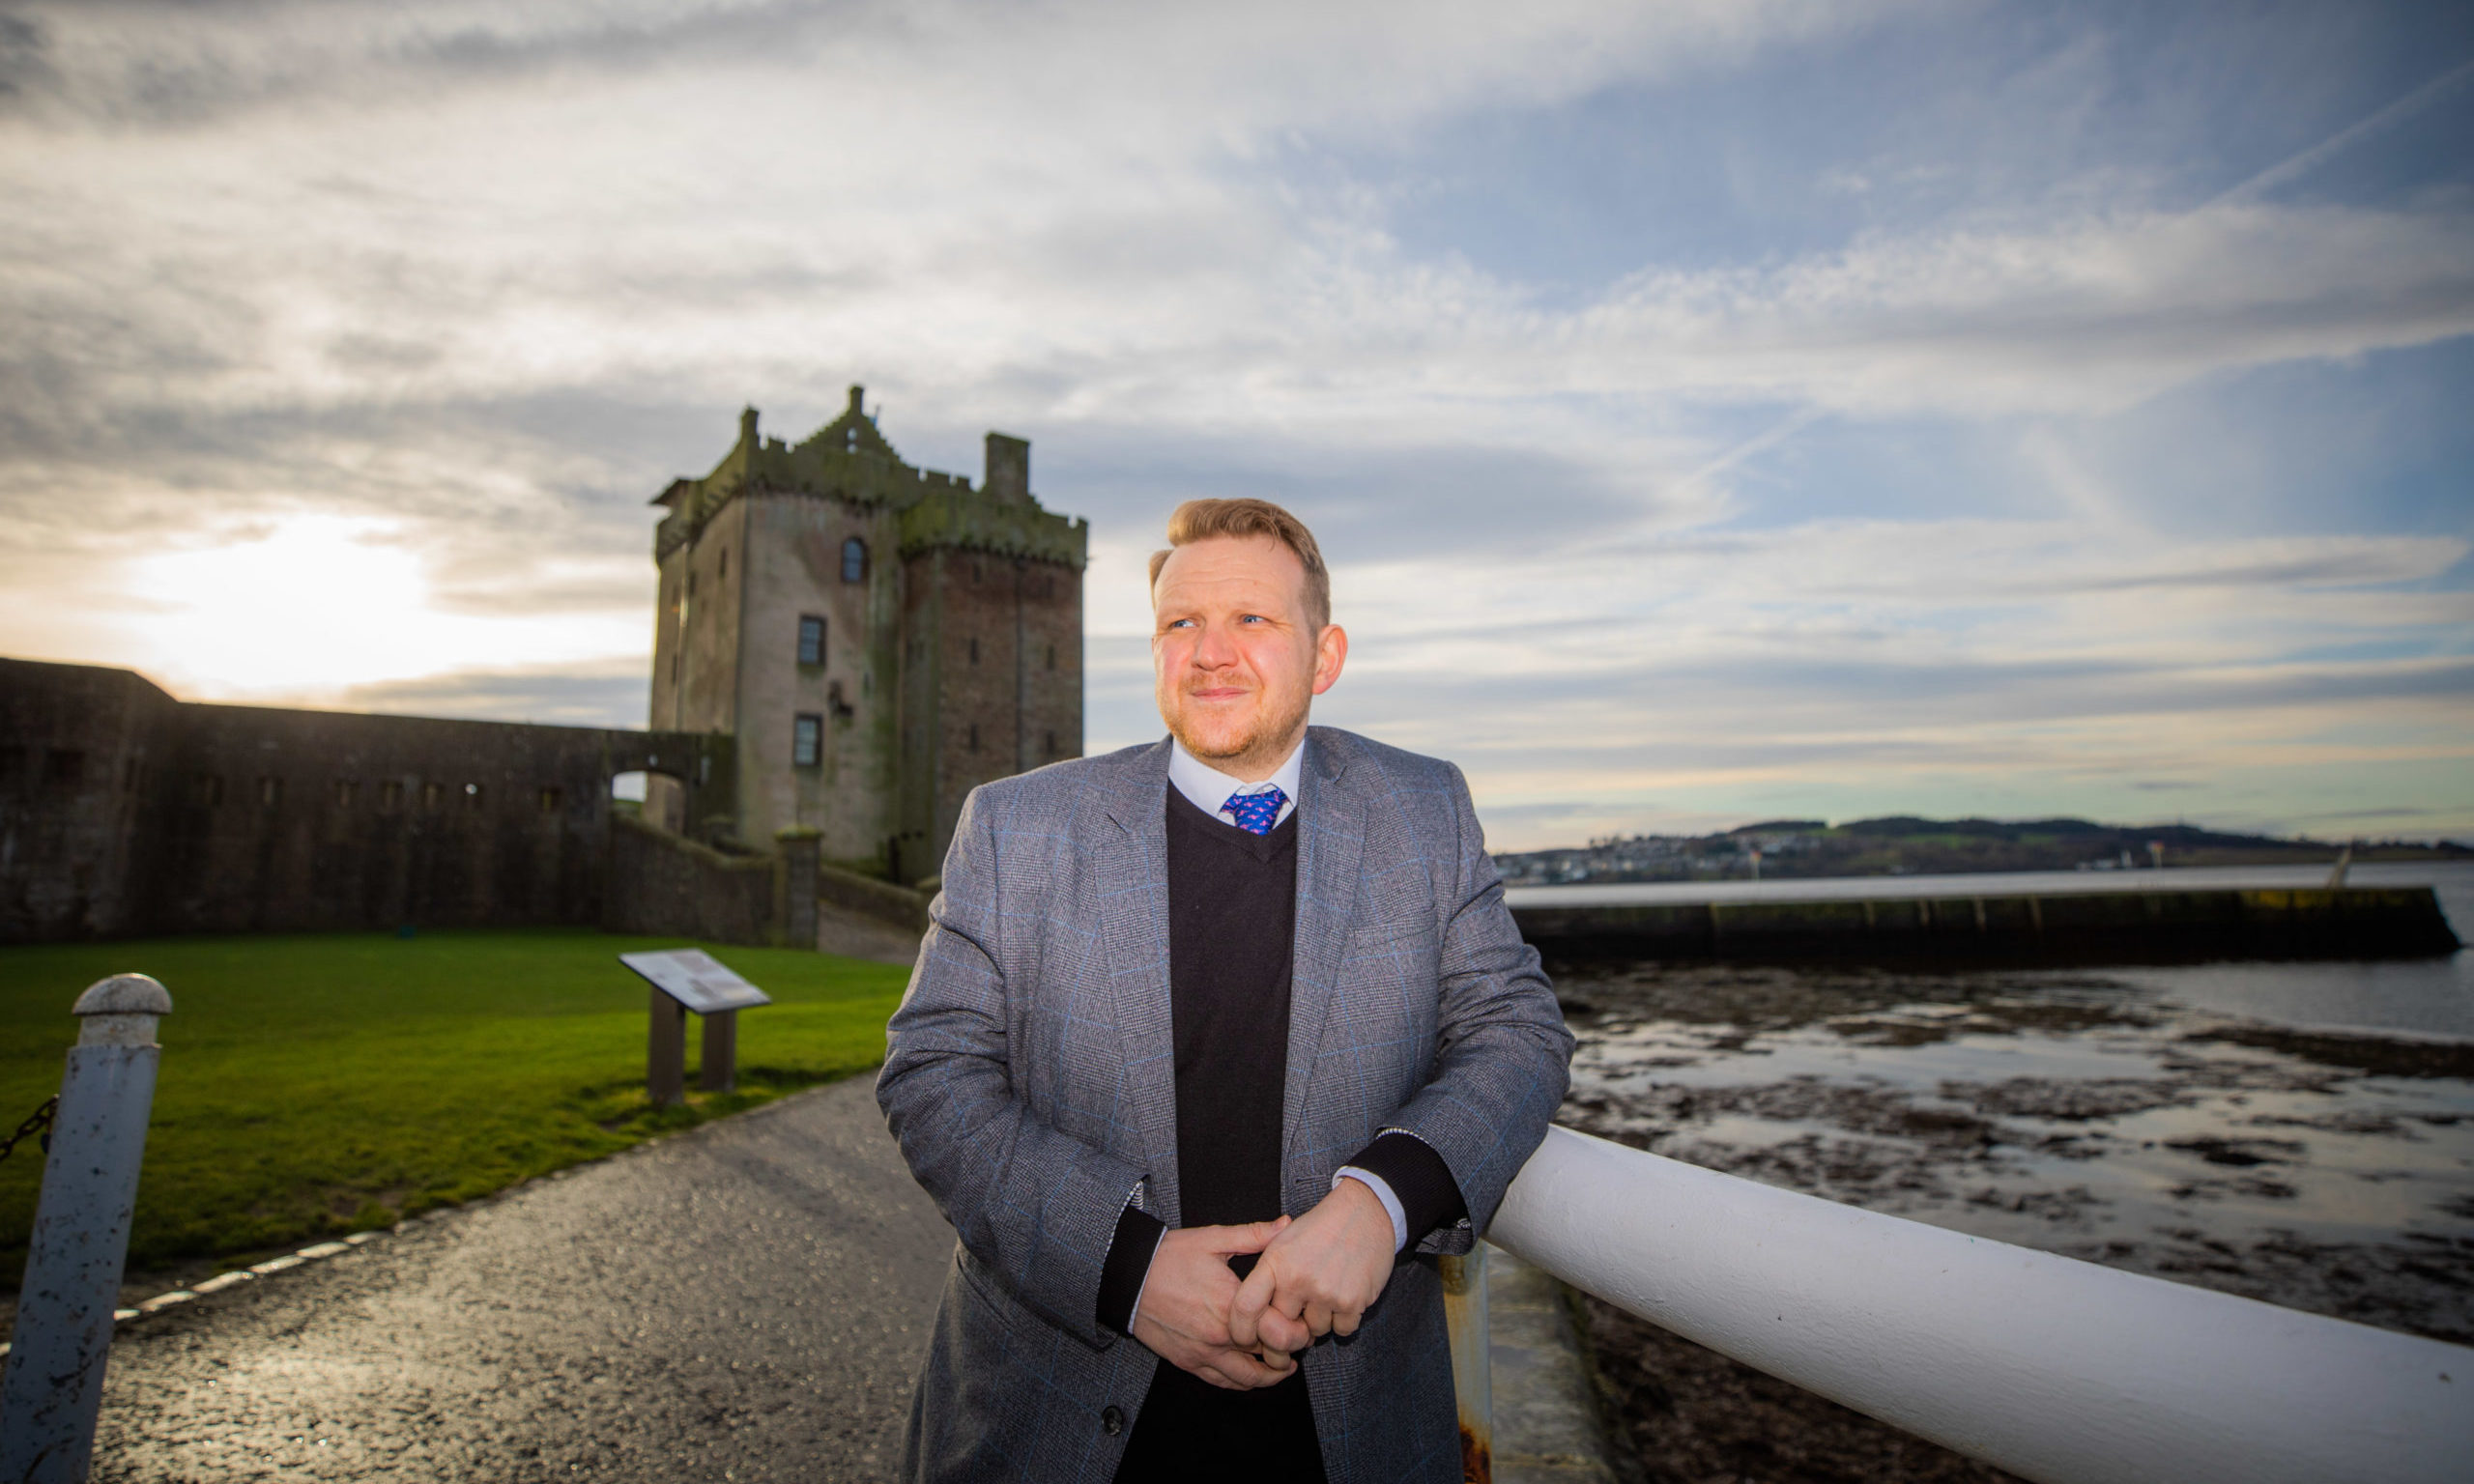 Alan Ross City Development Convener. Broughty Ferry Castle, Castle Approach, Broughty Ferry, Dundee. Friday 24th January 2020  Pic Credit - Steve MacDougall / DCT Media